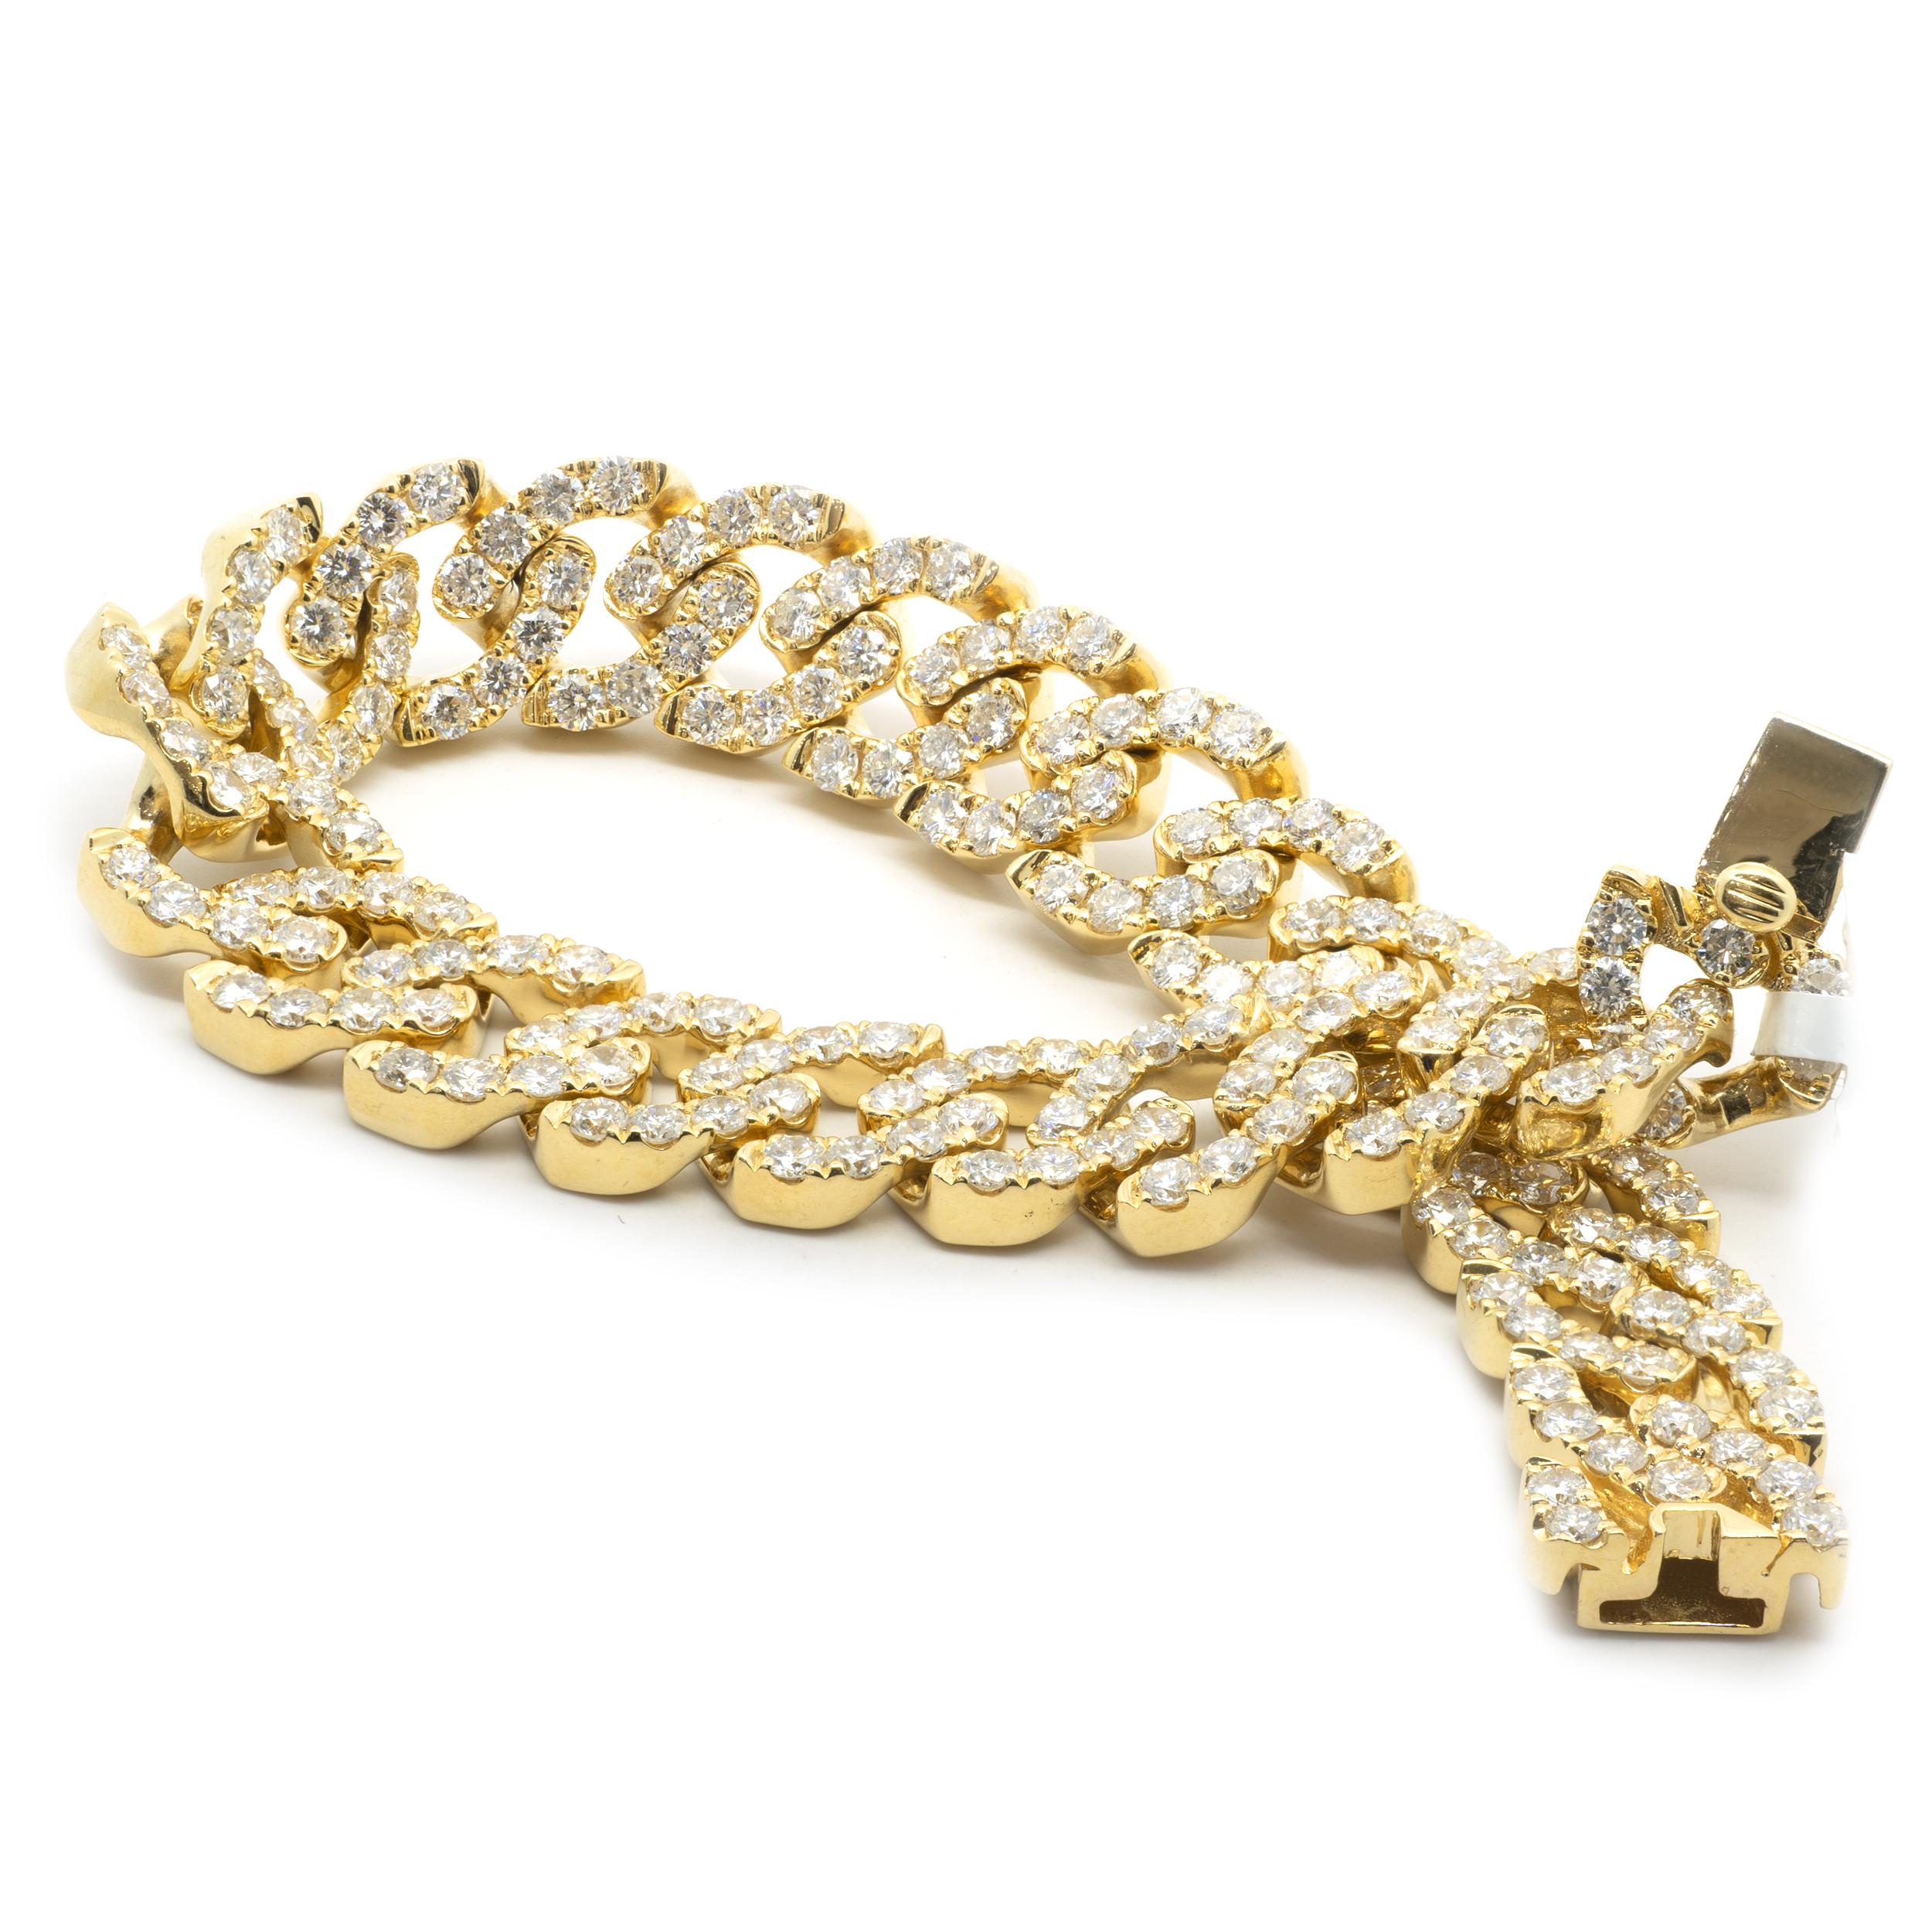 Designer: custom
Material: 18K yellow gold
Diamonds: 197 round brilliant cut = 10.92cttw
Color: G
Clarity: VS2
Dimensions: bracelet will fit up to a 7.5-inch wrist
Weight: 46.79 grams
